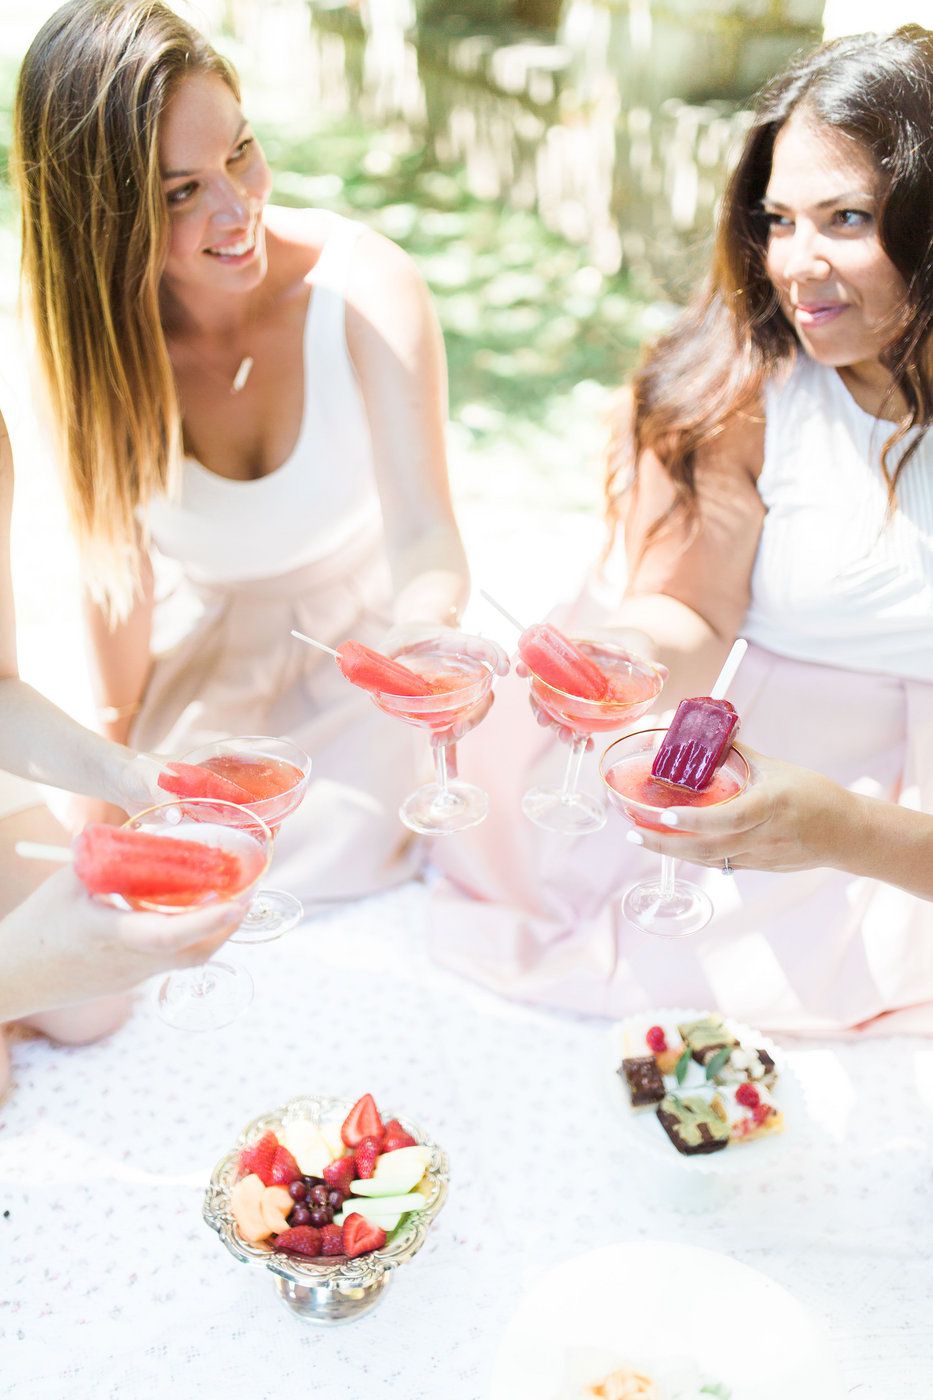 Who hosts (and pays for) the bridal shower?